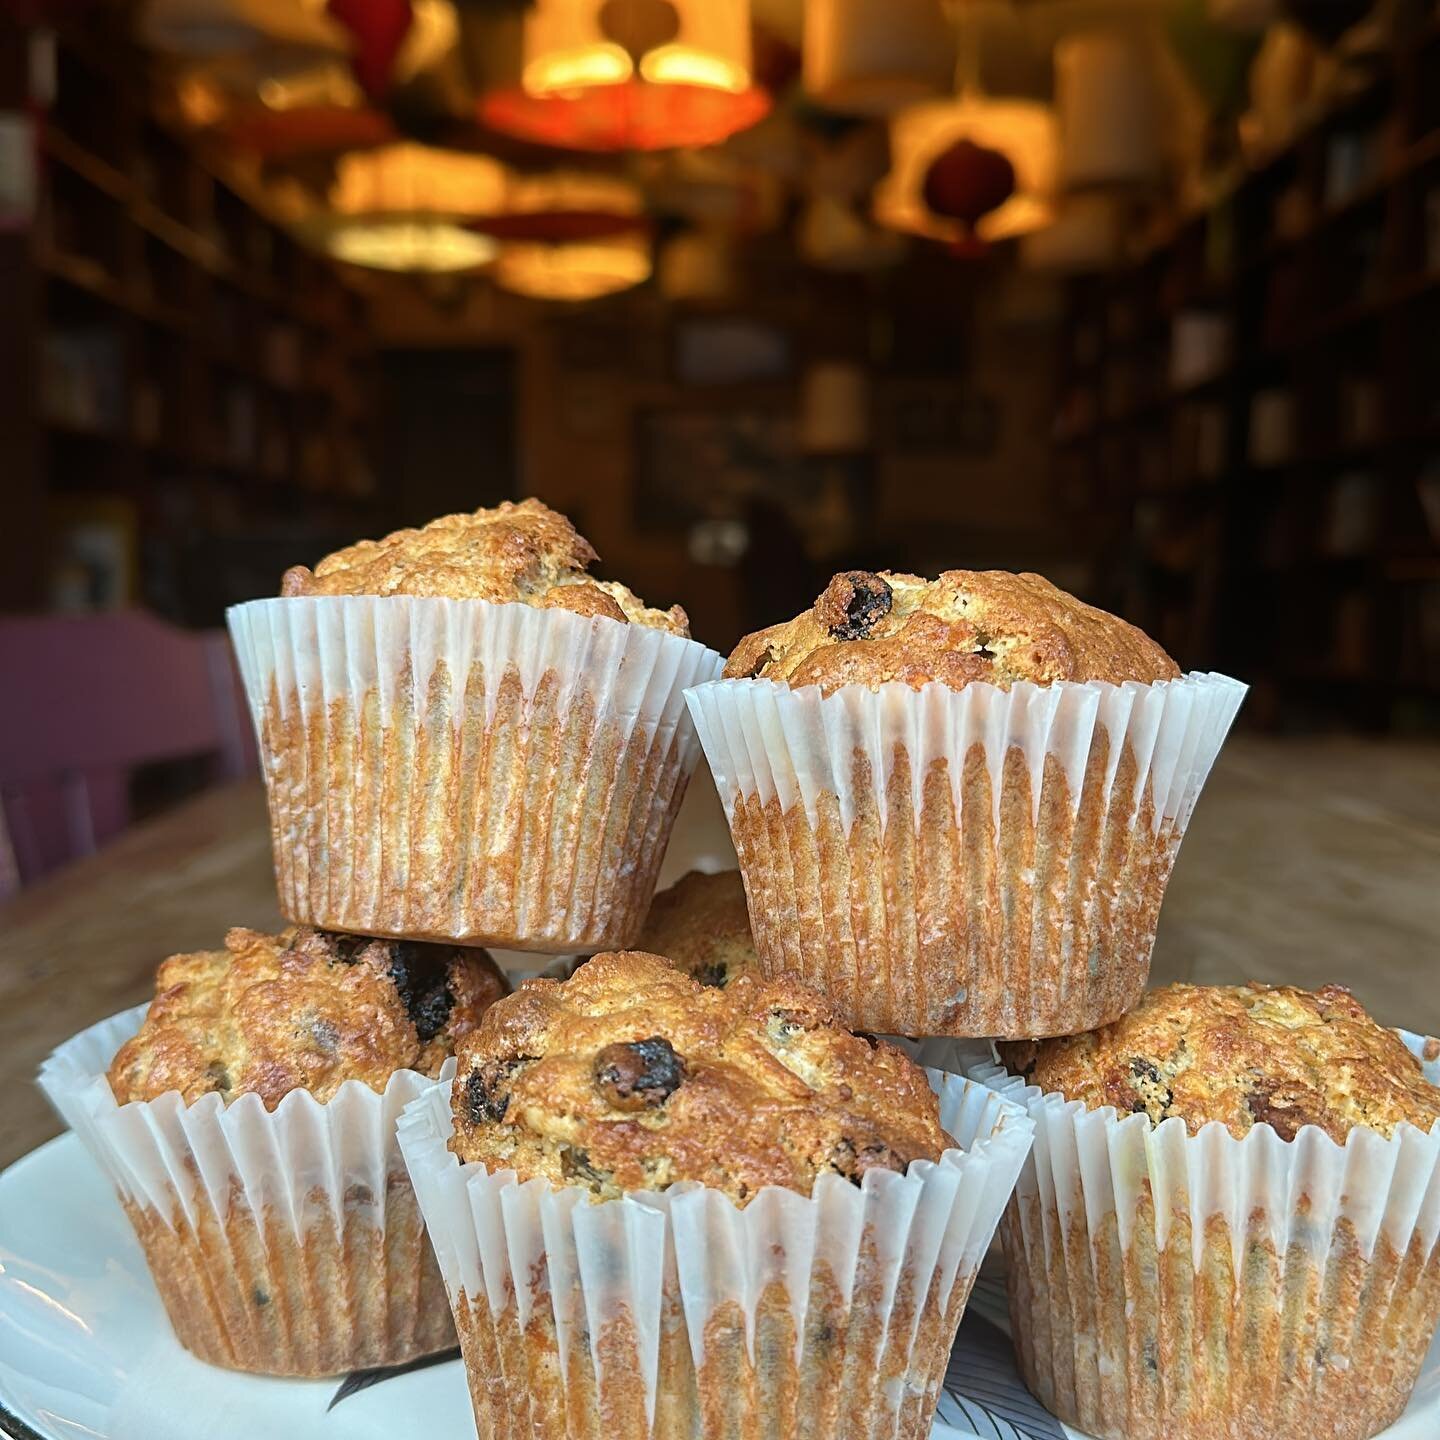 Hope your day is magical and filled with tasty muffins like surprises!
#drbombays 
#drbombaysunderwaterteaparty 
#candlerpark